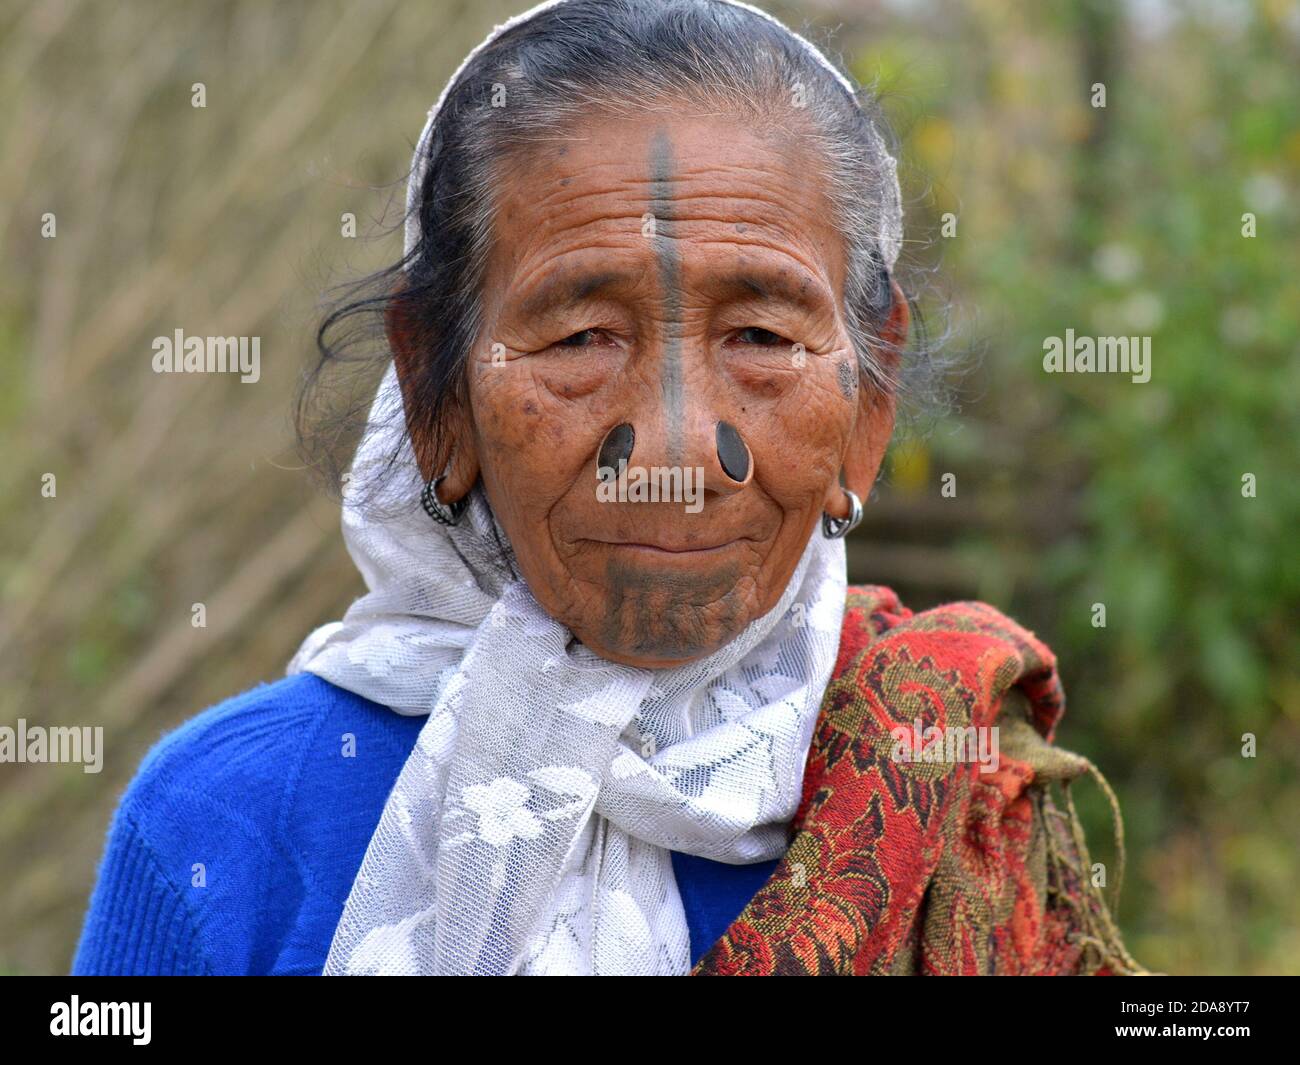 Old Northeast Indian Apatani ethnic minority tribal woman with black wooden nose plugs and traditional face tattoos poses for the camera. Stock Photo